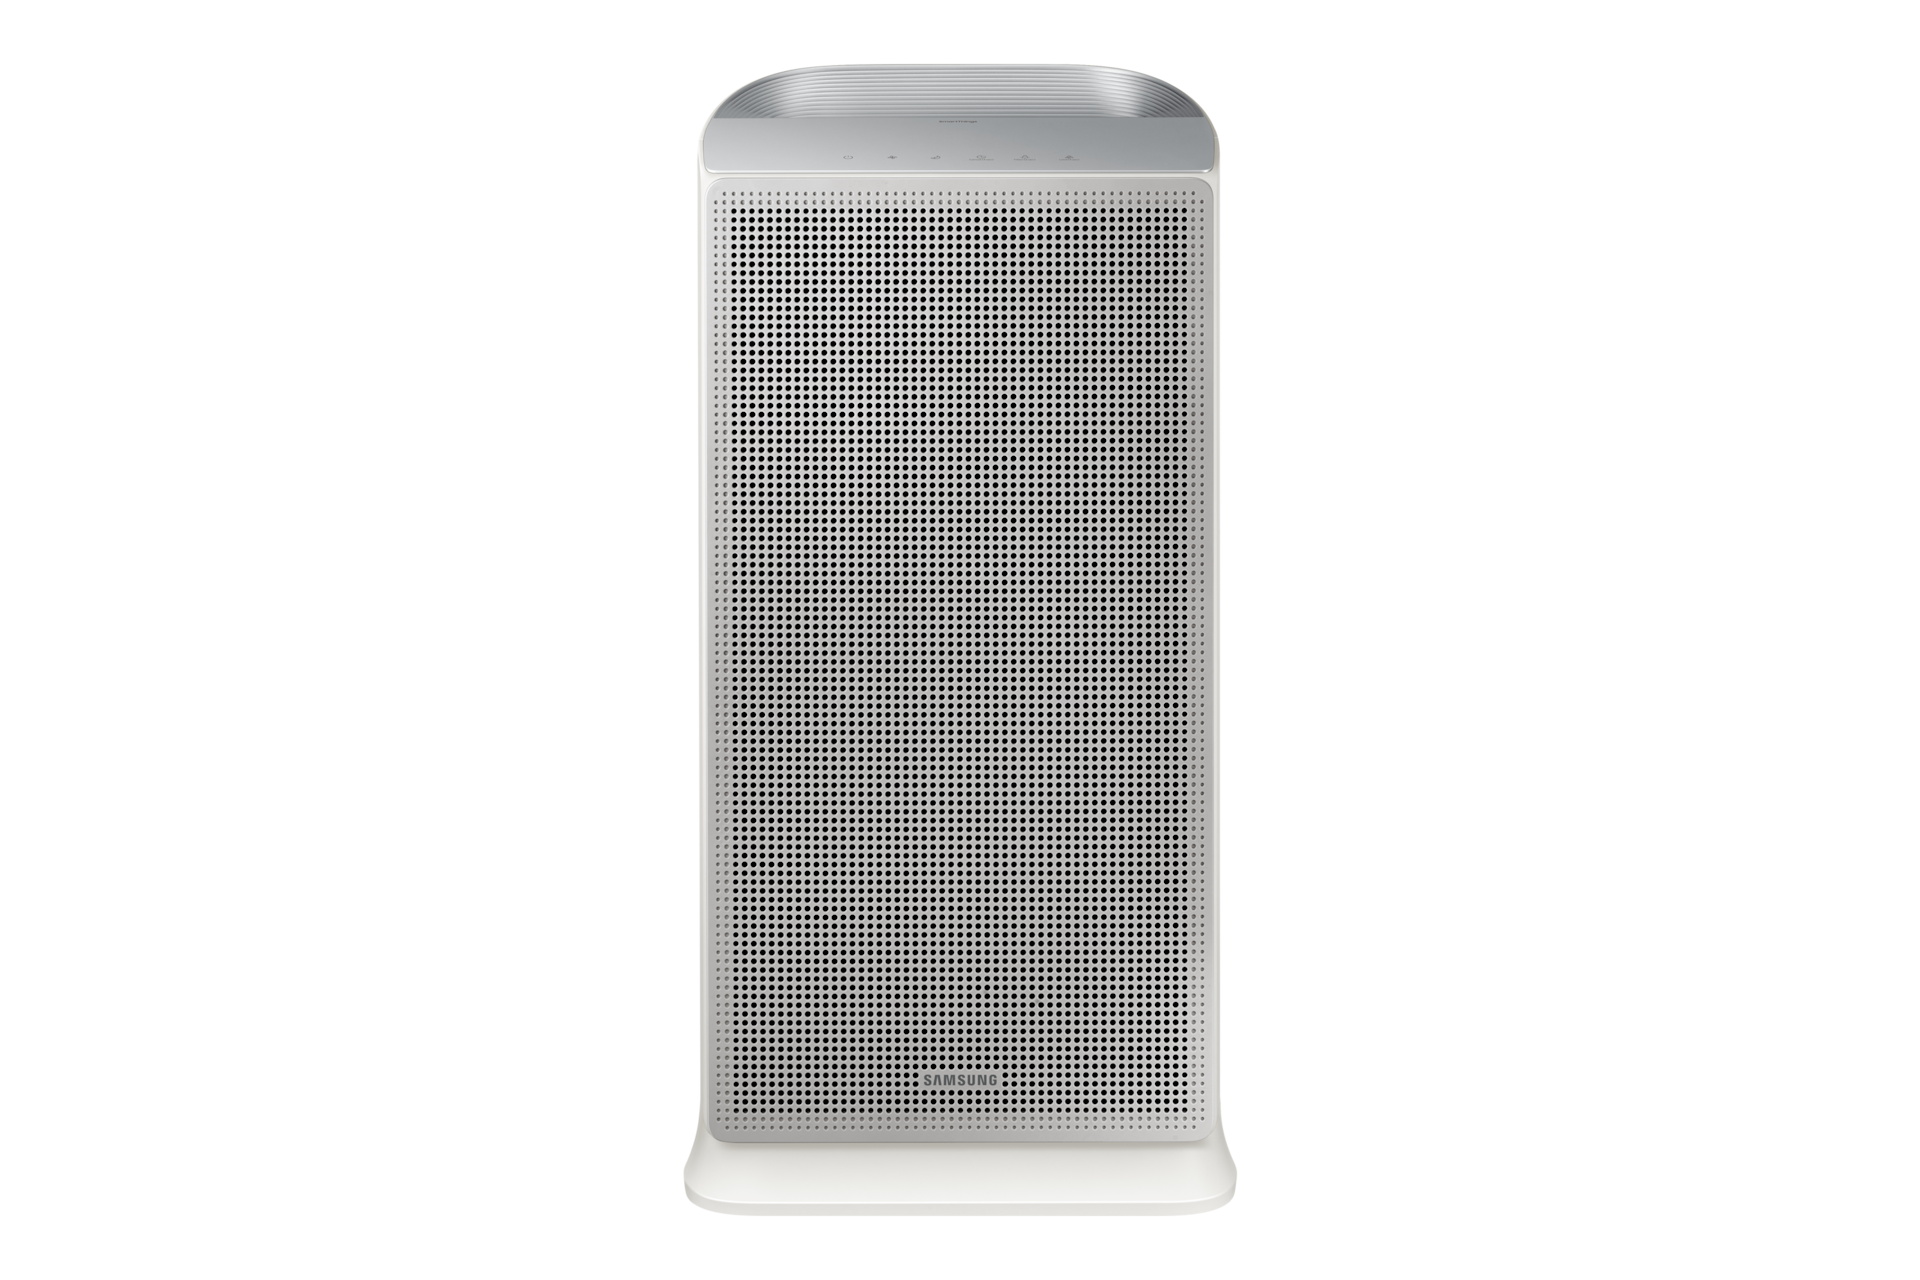 Buy Samsung Smart Air Purifier 60m2 in Gray at the latest prices in Malaysia